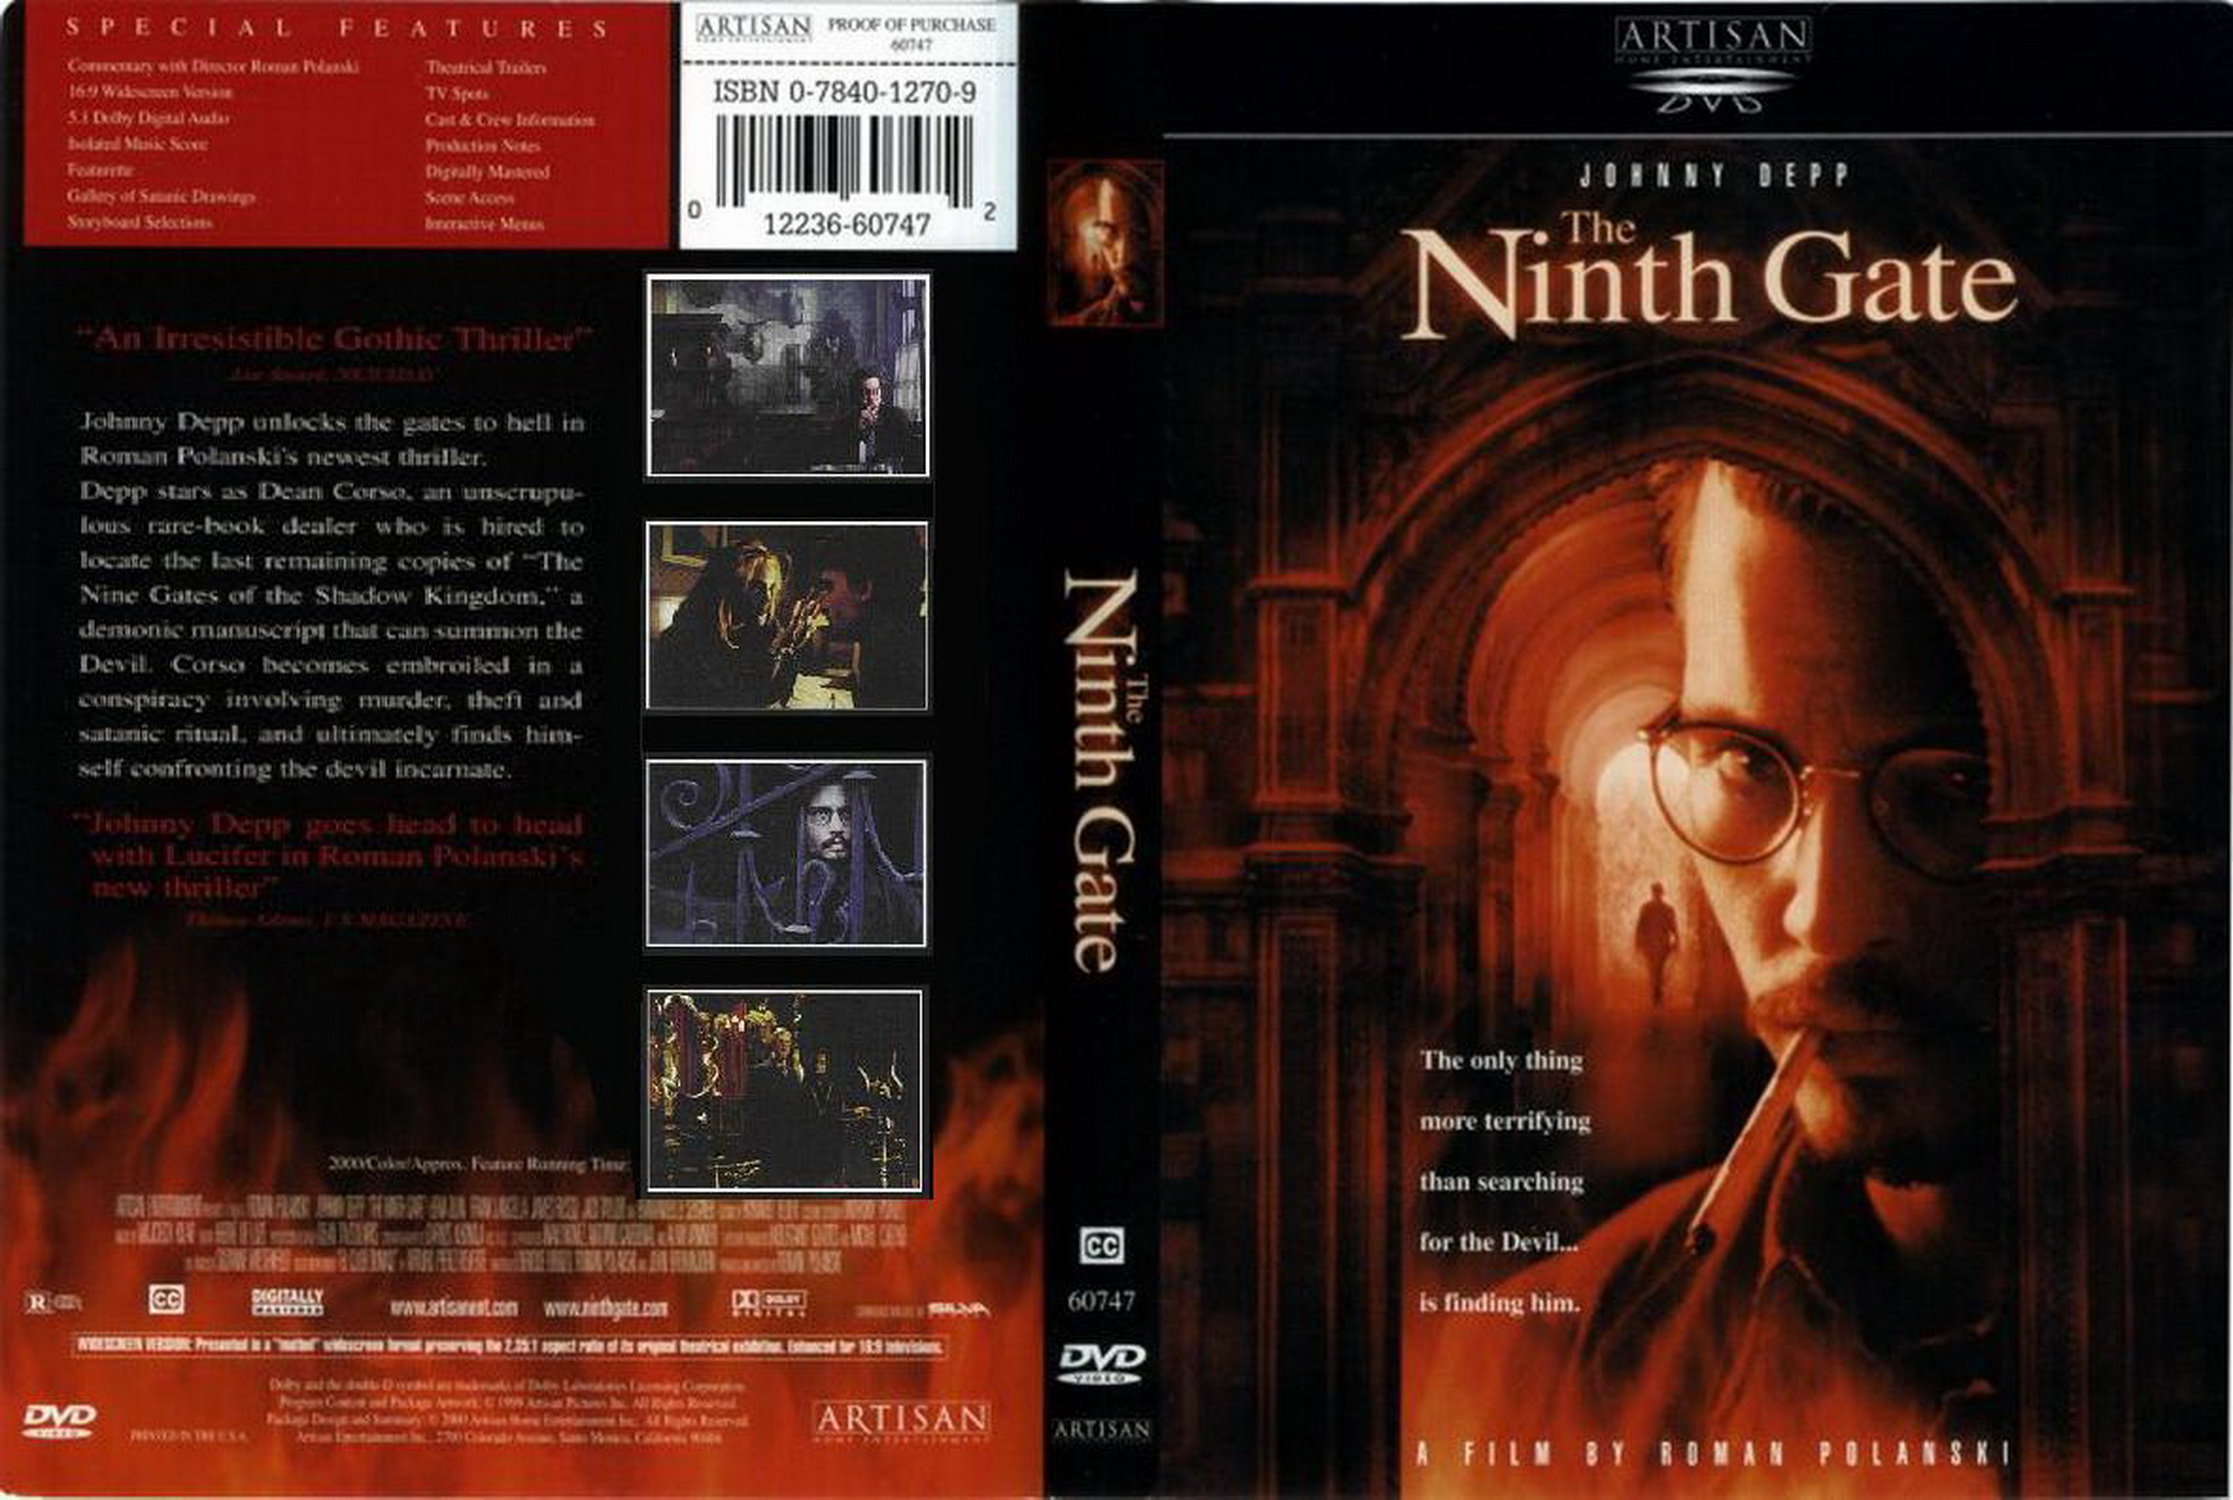 The Ninth Gate - front.